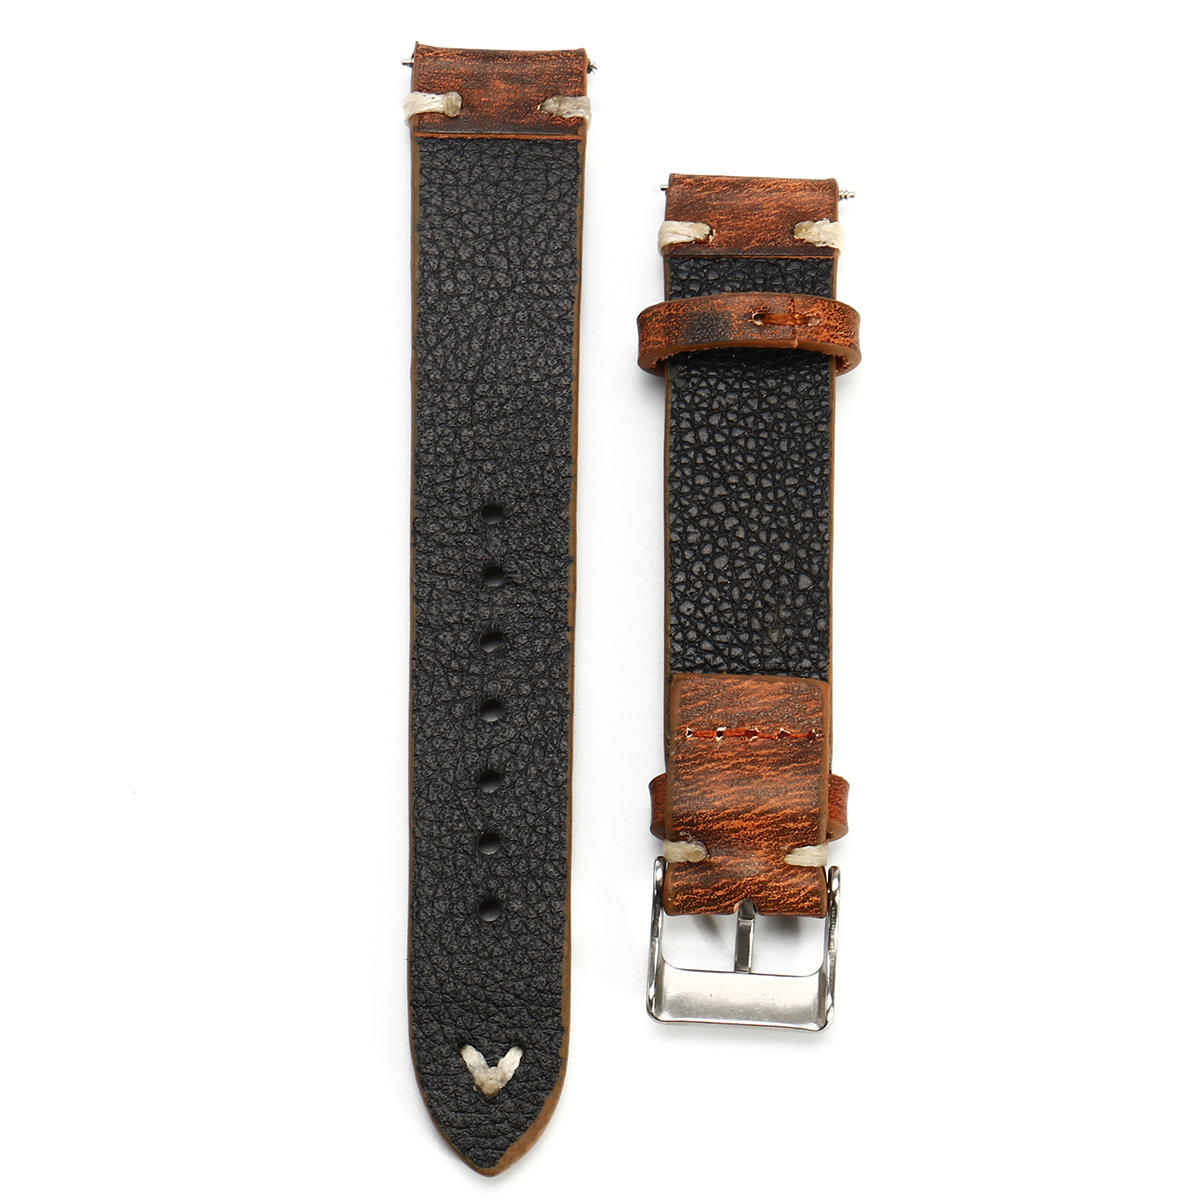 straps vintage style distressed leather wome/men watch band strap with ...